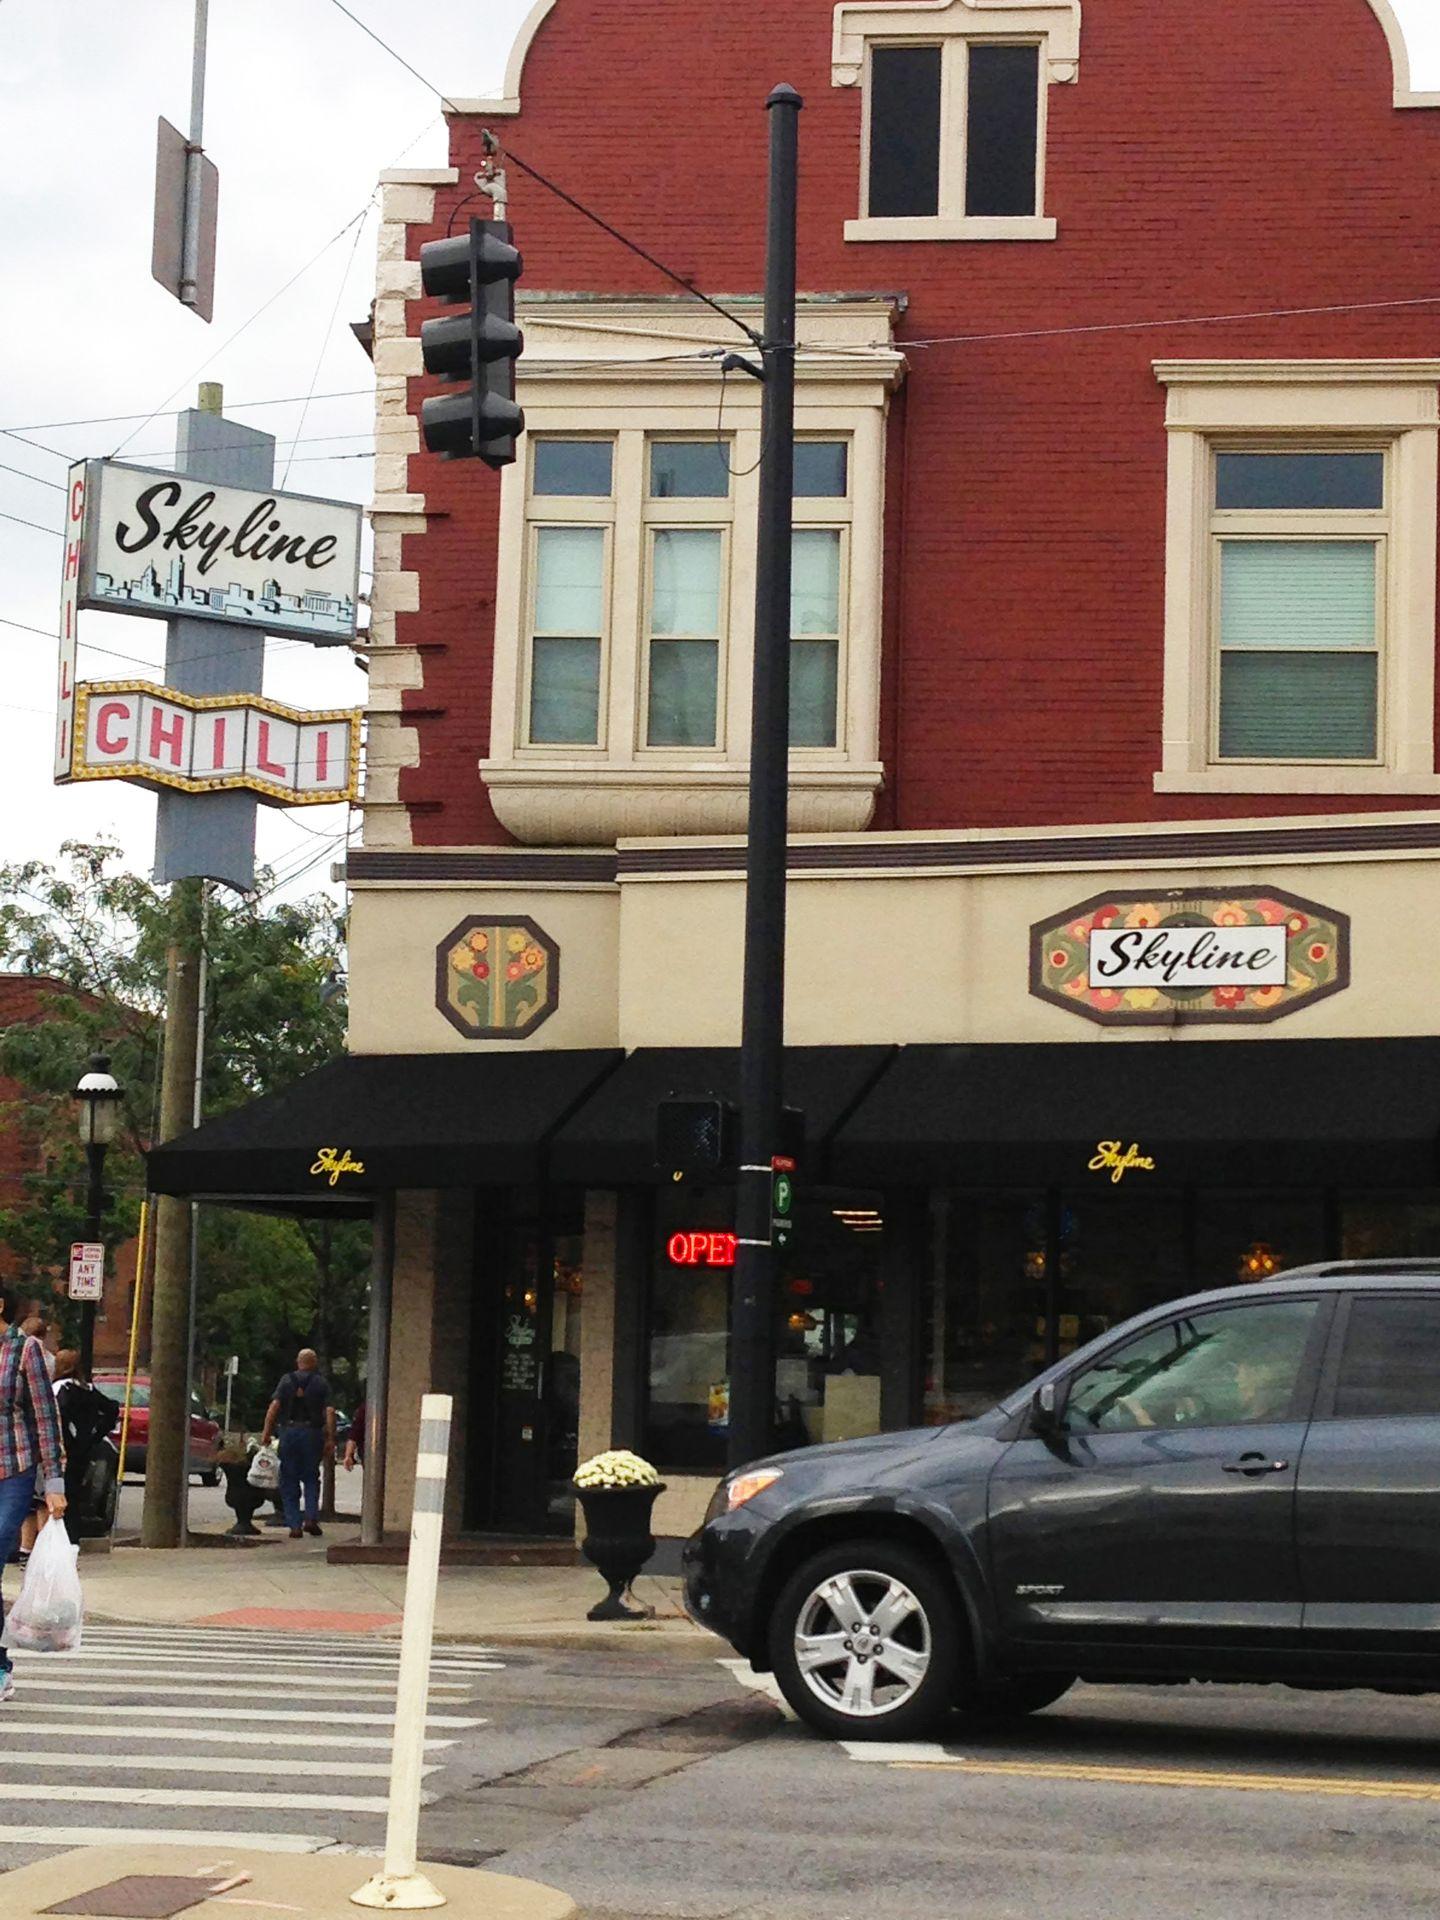 An exteior look at the Skyline Chili location on Ludlow Ave. The signage feels retro.